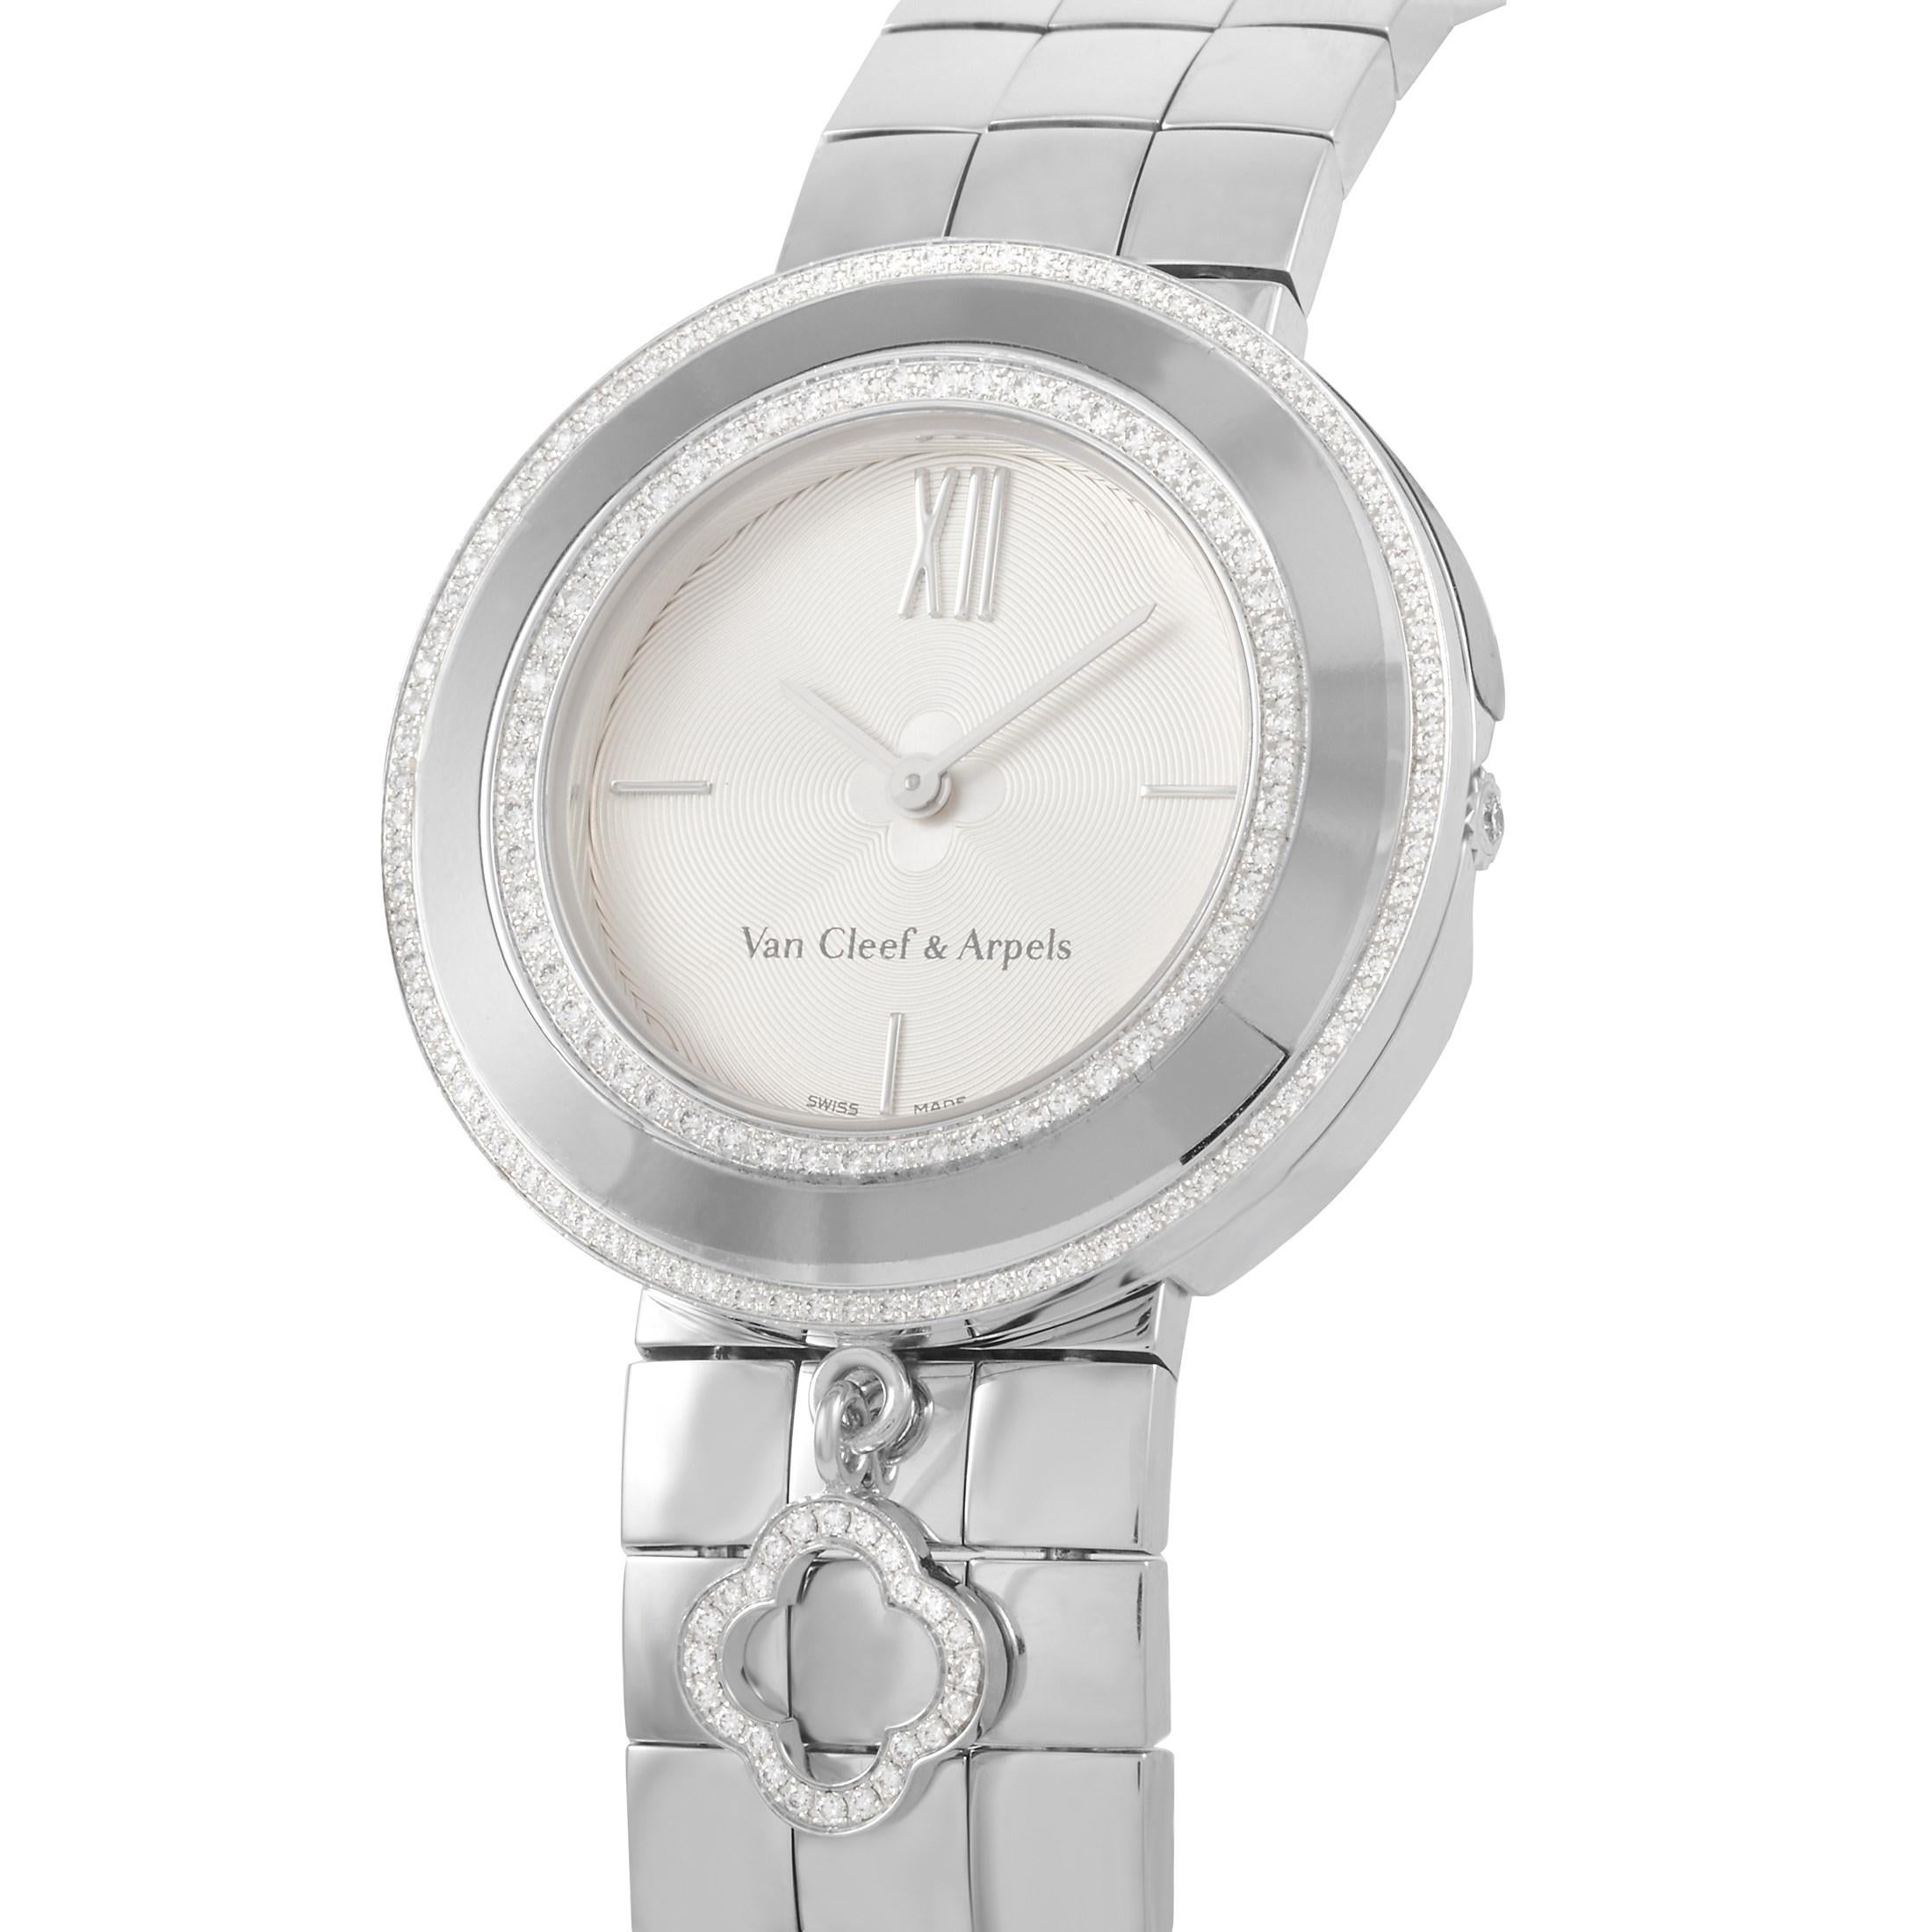 This Van Cleef & Arpels 18K White Gold Alhambra Charms Quartz Watch, reference number 3572114, features an 18K White Gold case measuring 32 mm in diameter. The bezel is set with two rows round diamonds, and features an Alhambra charm. It is